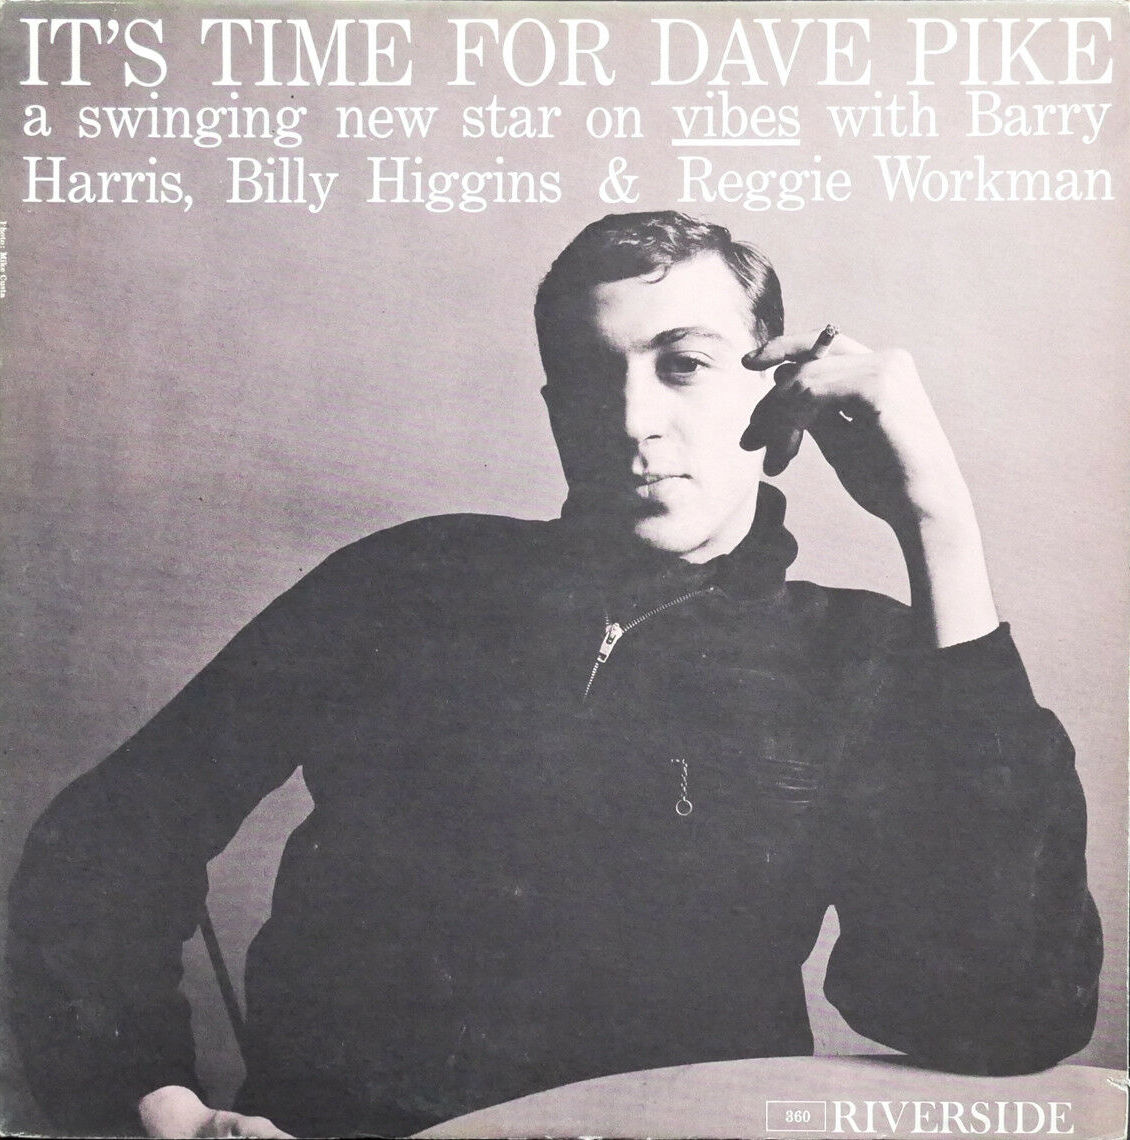 Dave Pike - It's Time For Dave Pike